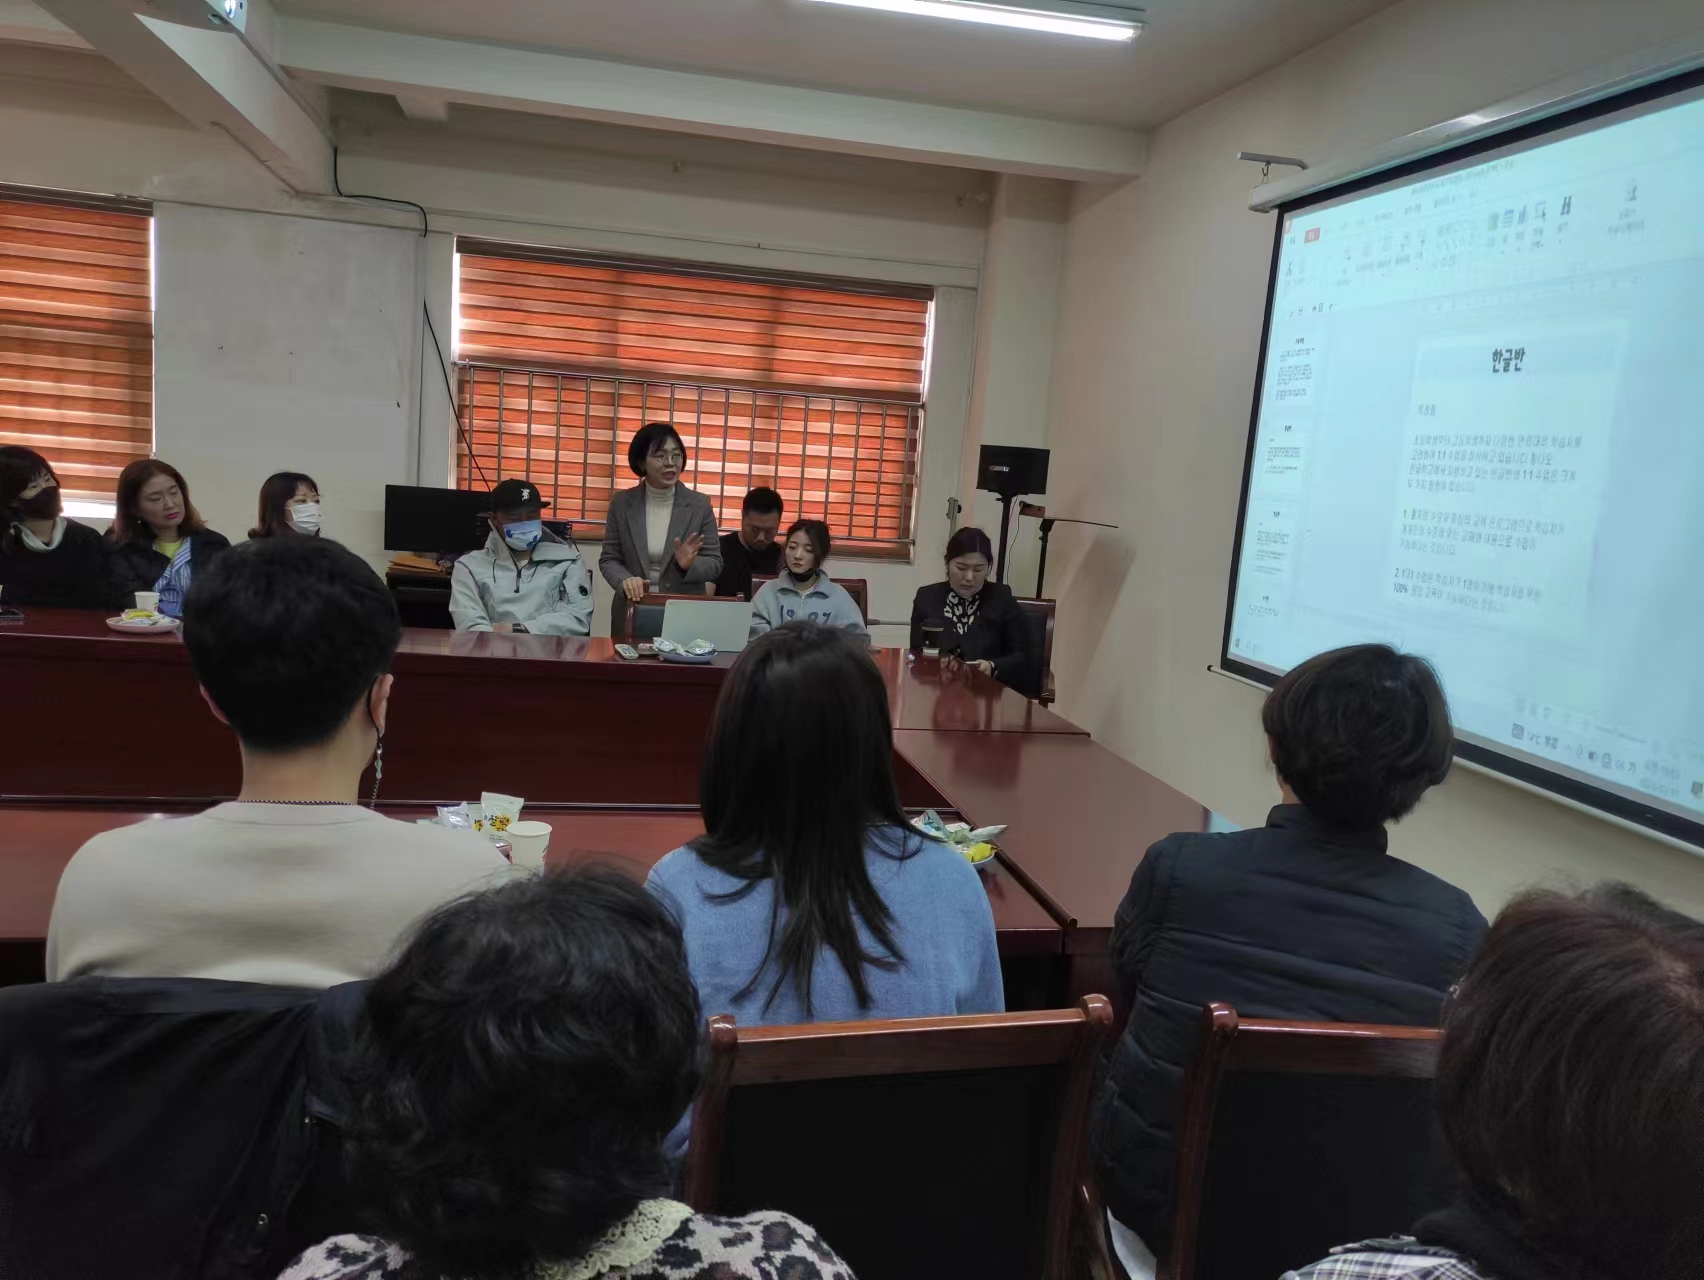 A representative explains class schedule during a parents' meeting of the Hangeul School in Qingdao